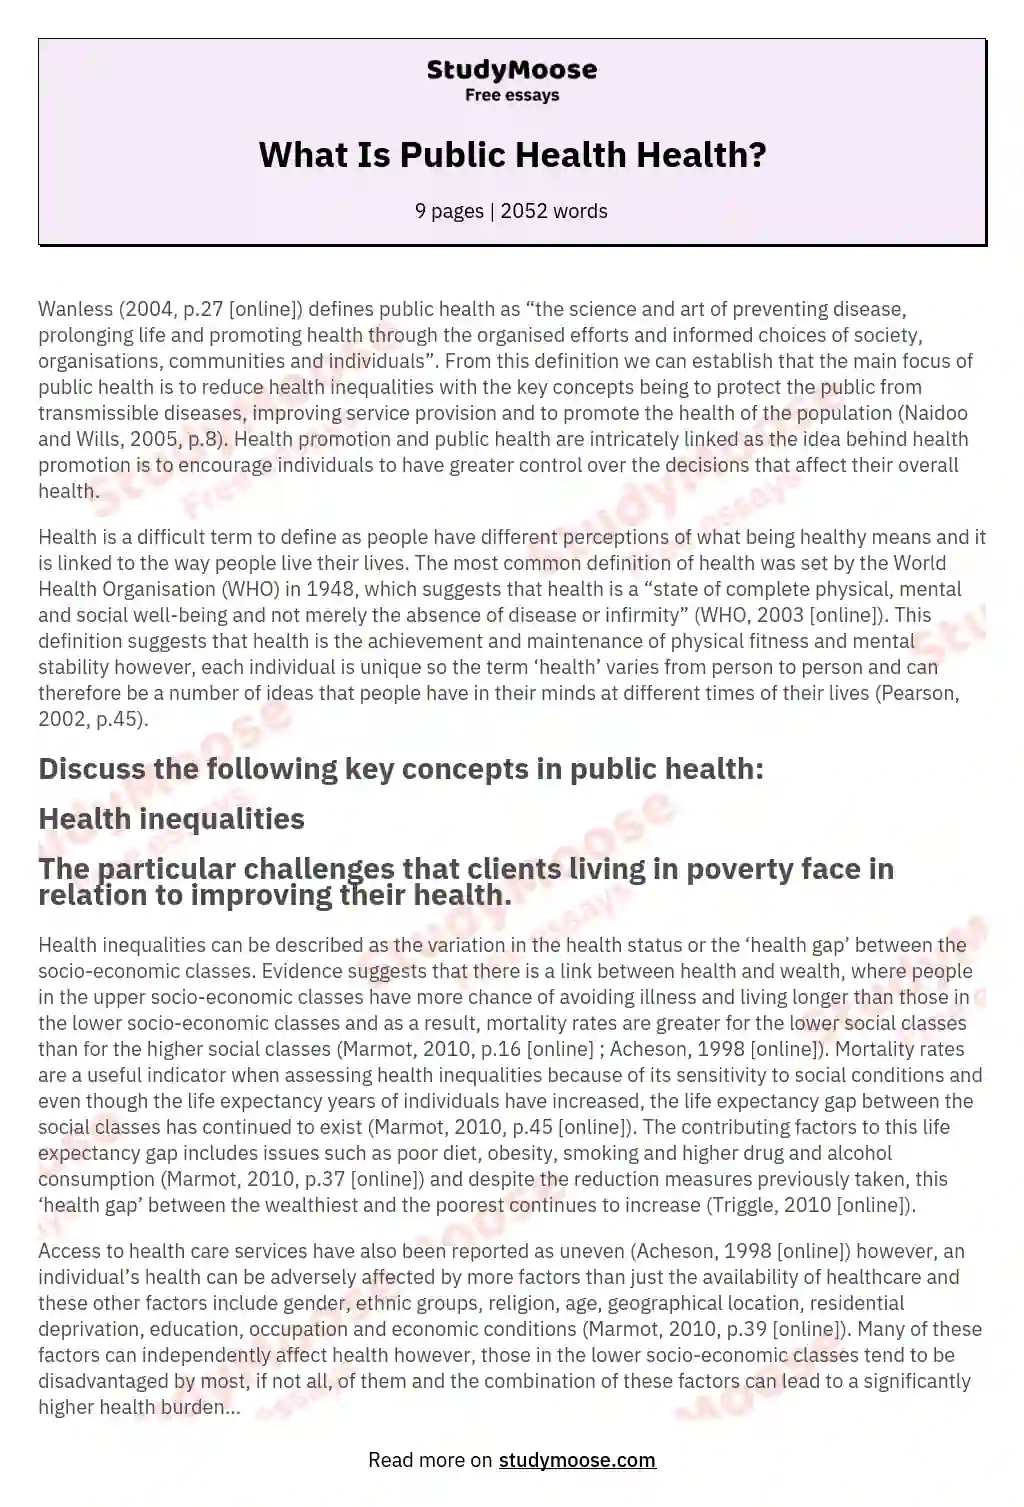 Health Inequalities and Poverty: A Public Health Perspective essay